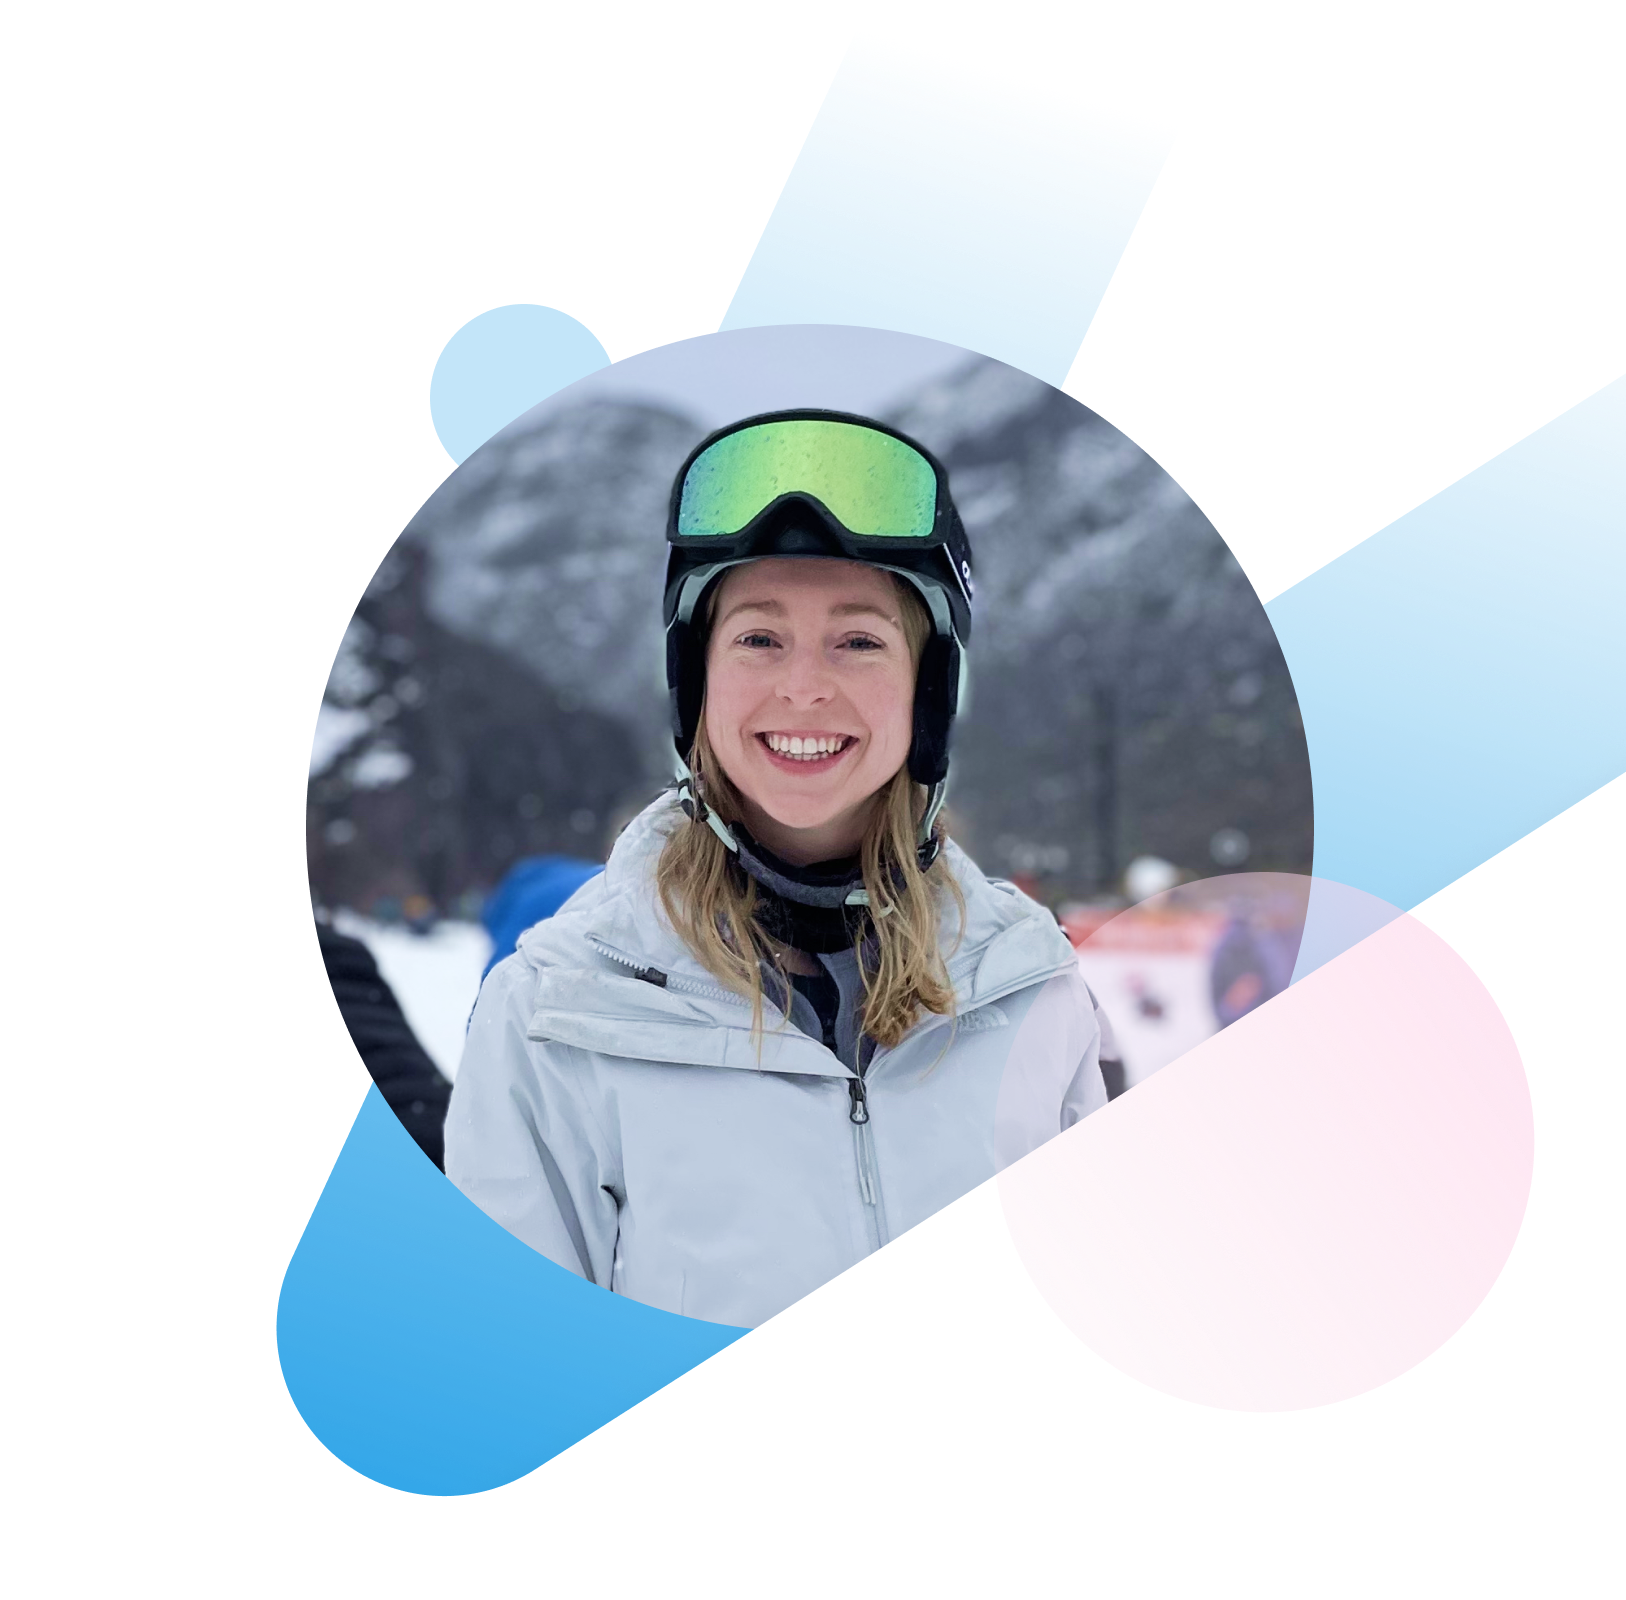 A woman smiling while wearing ski googles and a warm jacket. 